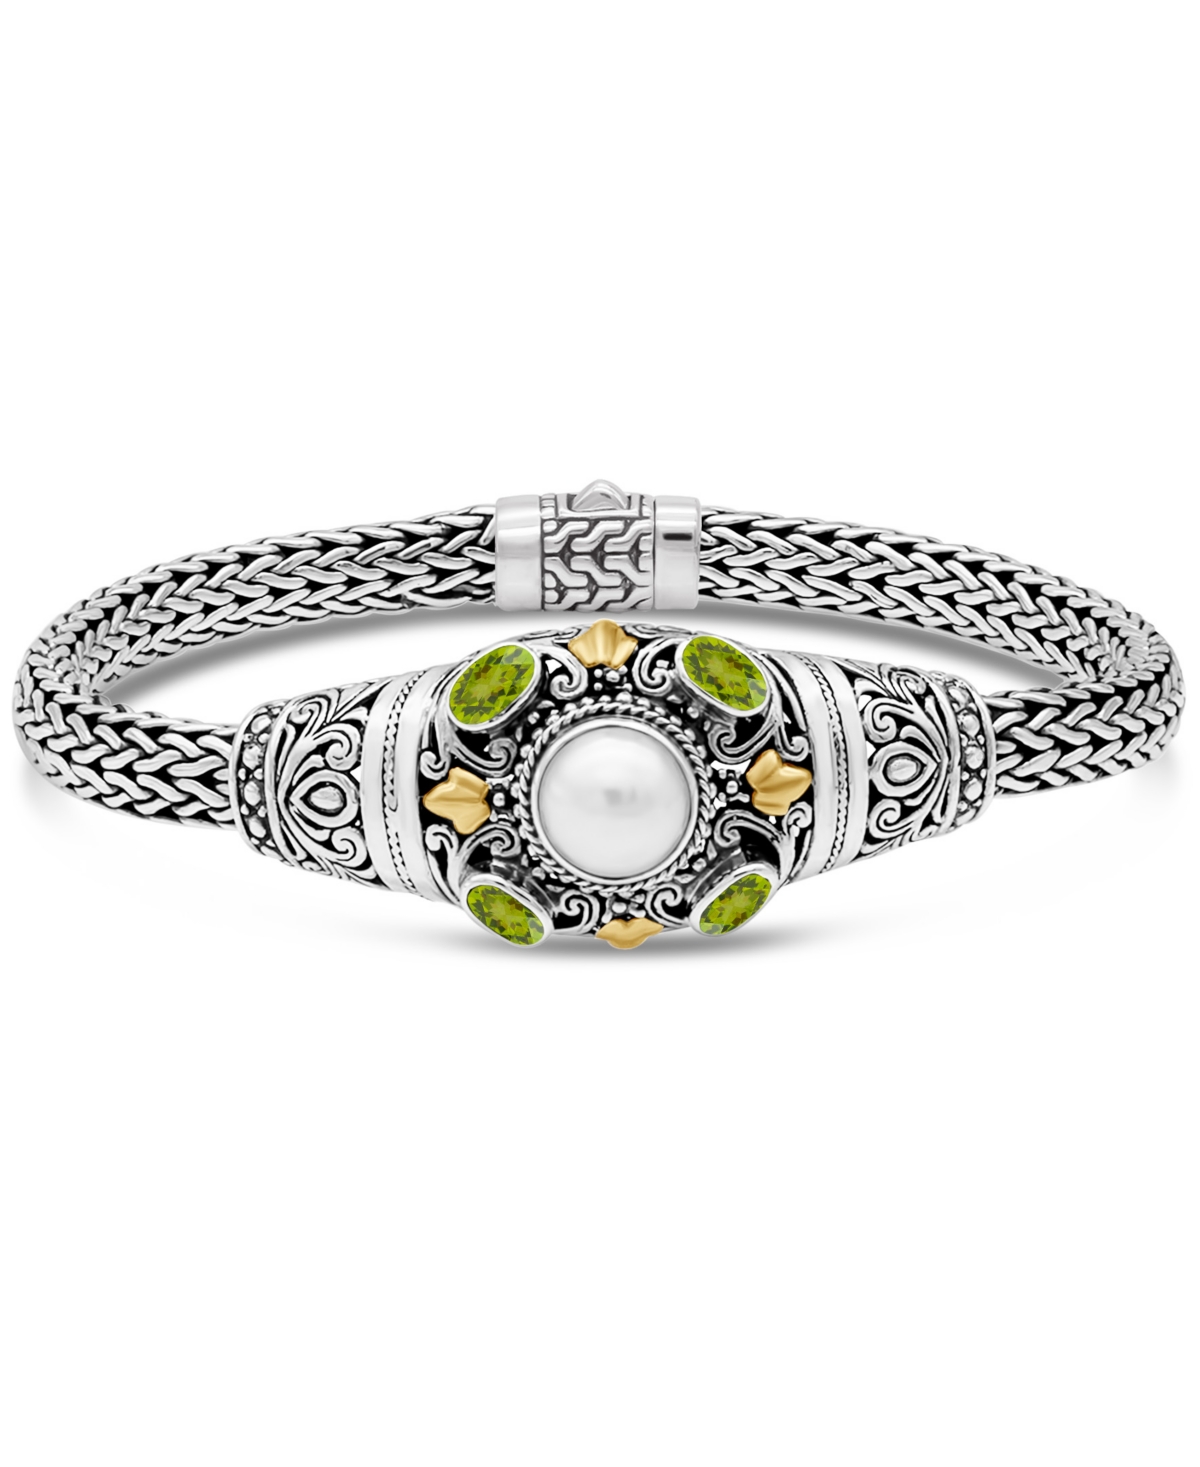 Peridot, Freshwater Cultured Pearl & Bali Filigree with Dragon Bone Oval 5mm Chain Bracelet in Sterling Silver and 18K Gold - Silver